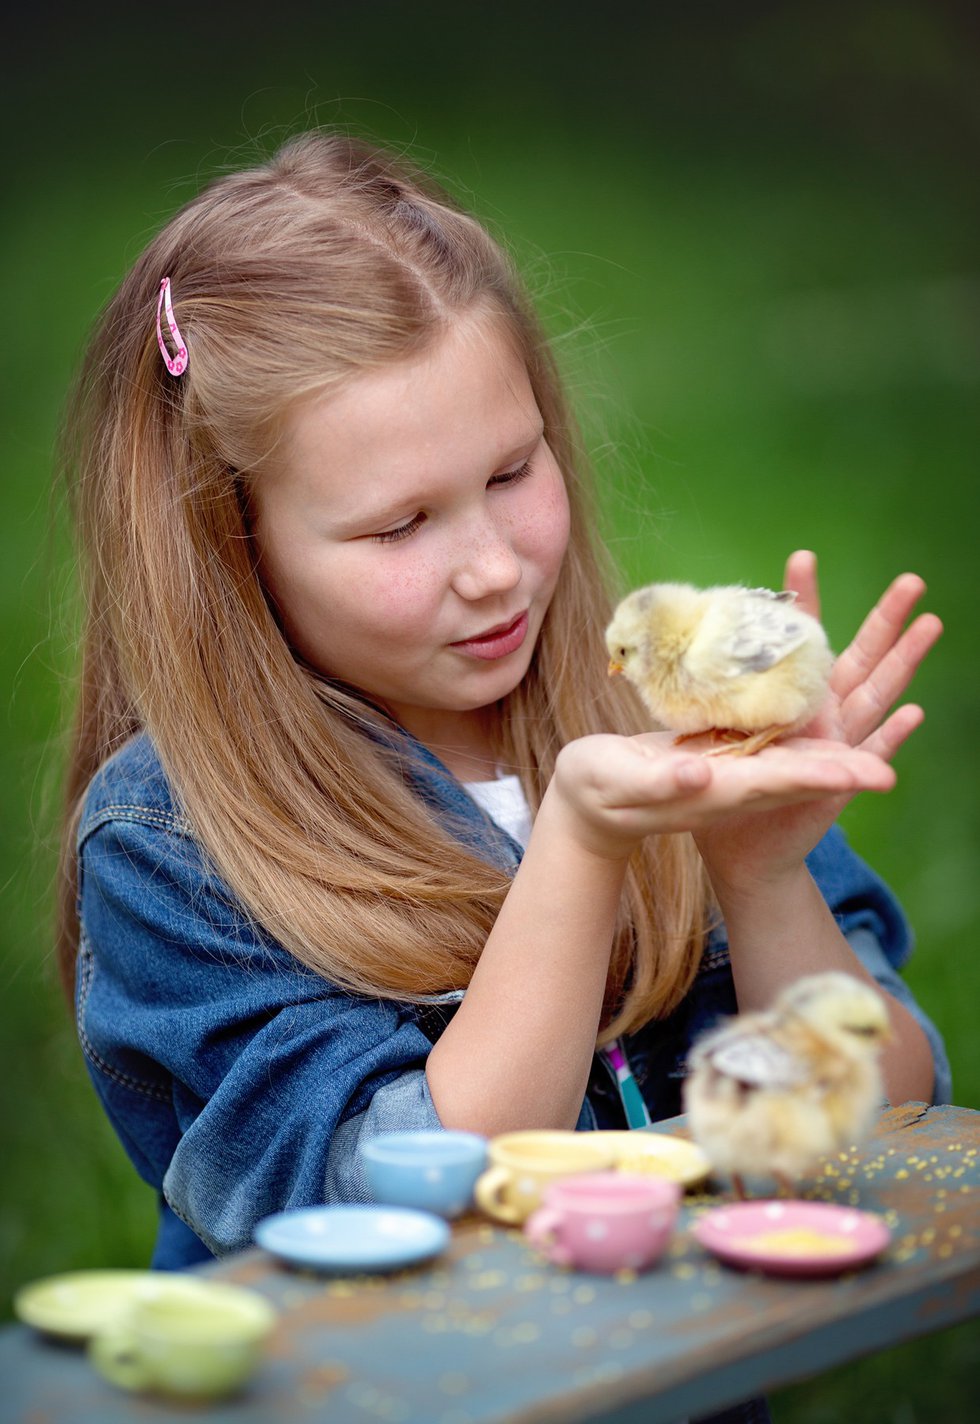 imagesevents27428girl-with-chick-jpg.jpe